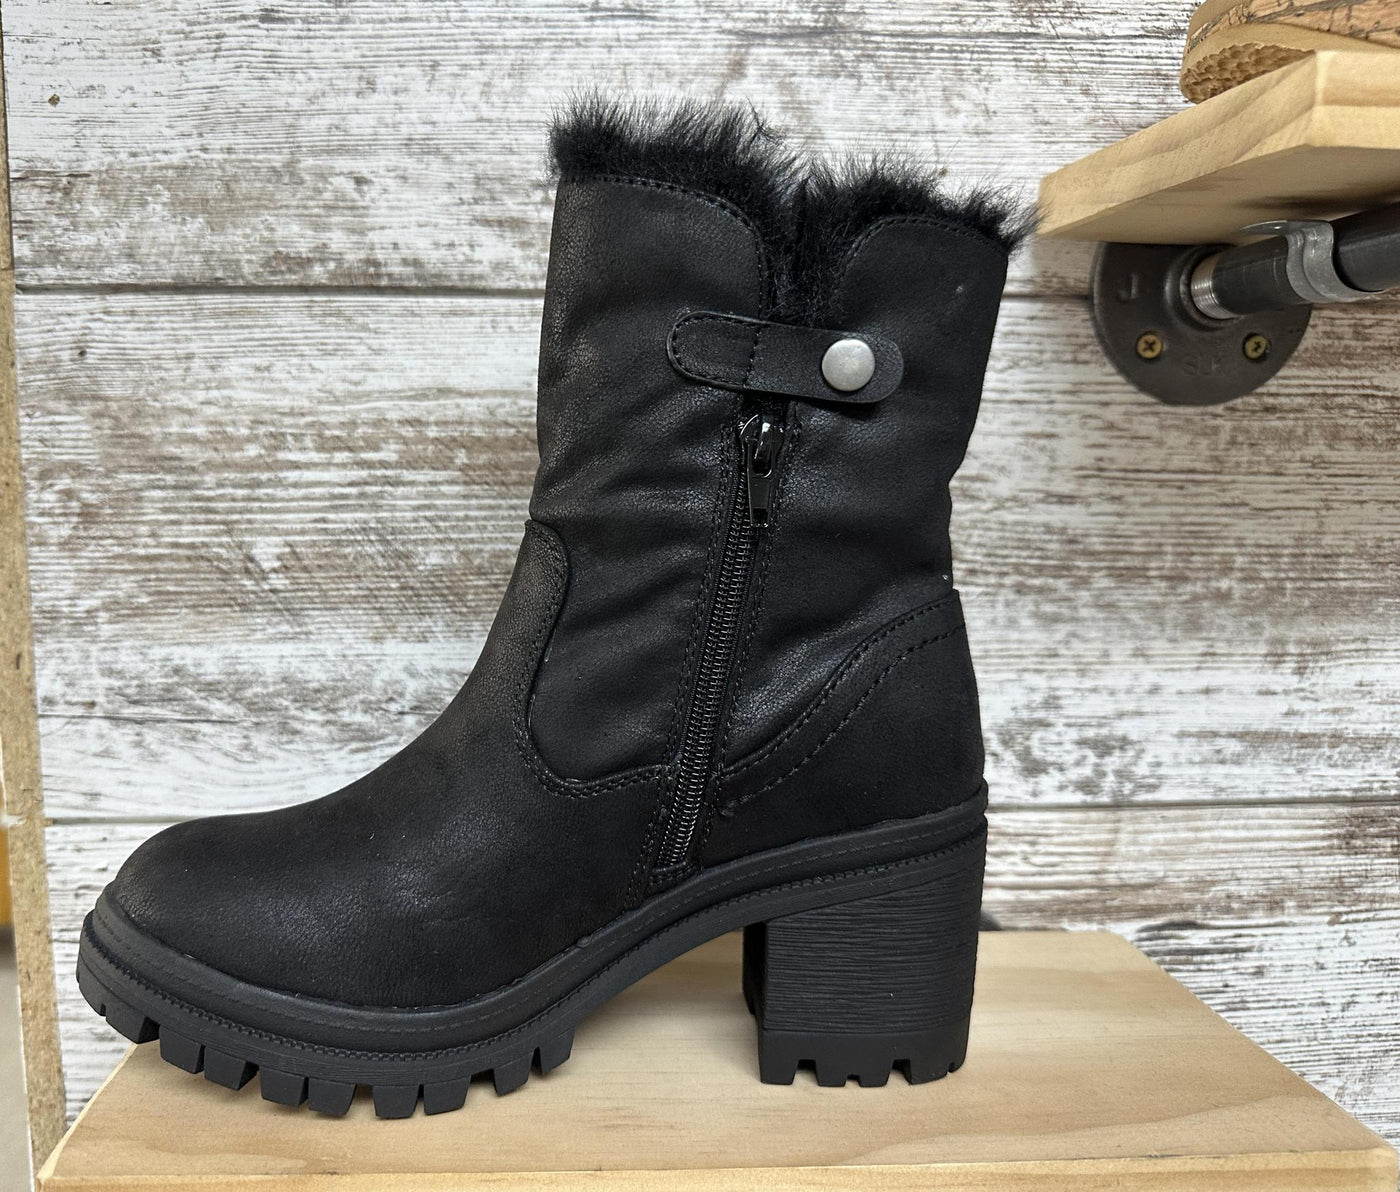 Fur lined Black Boot